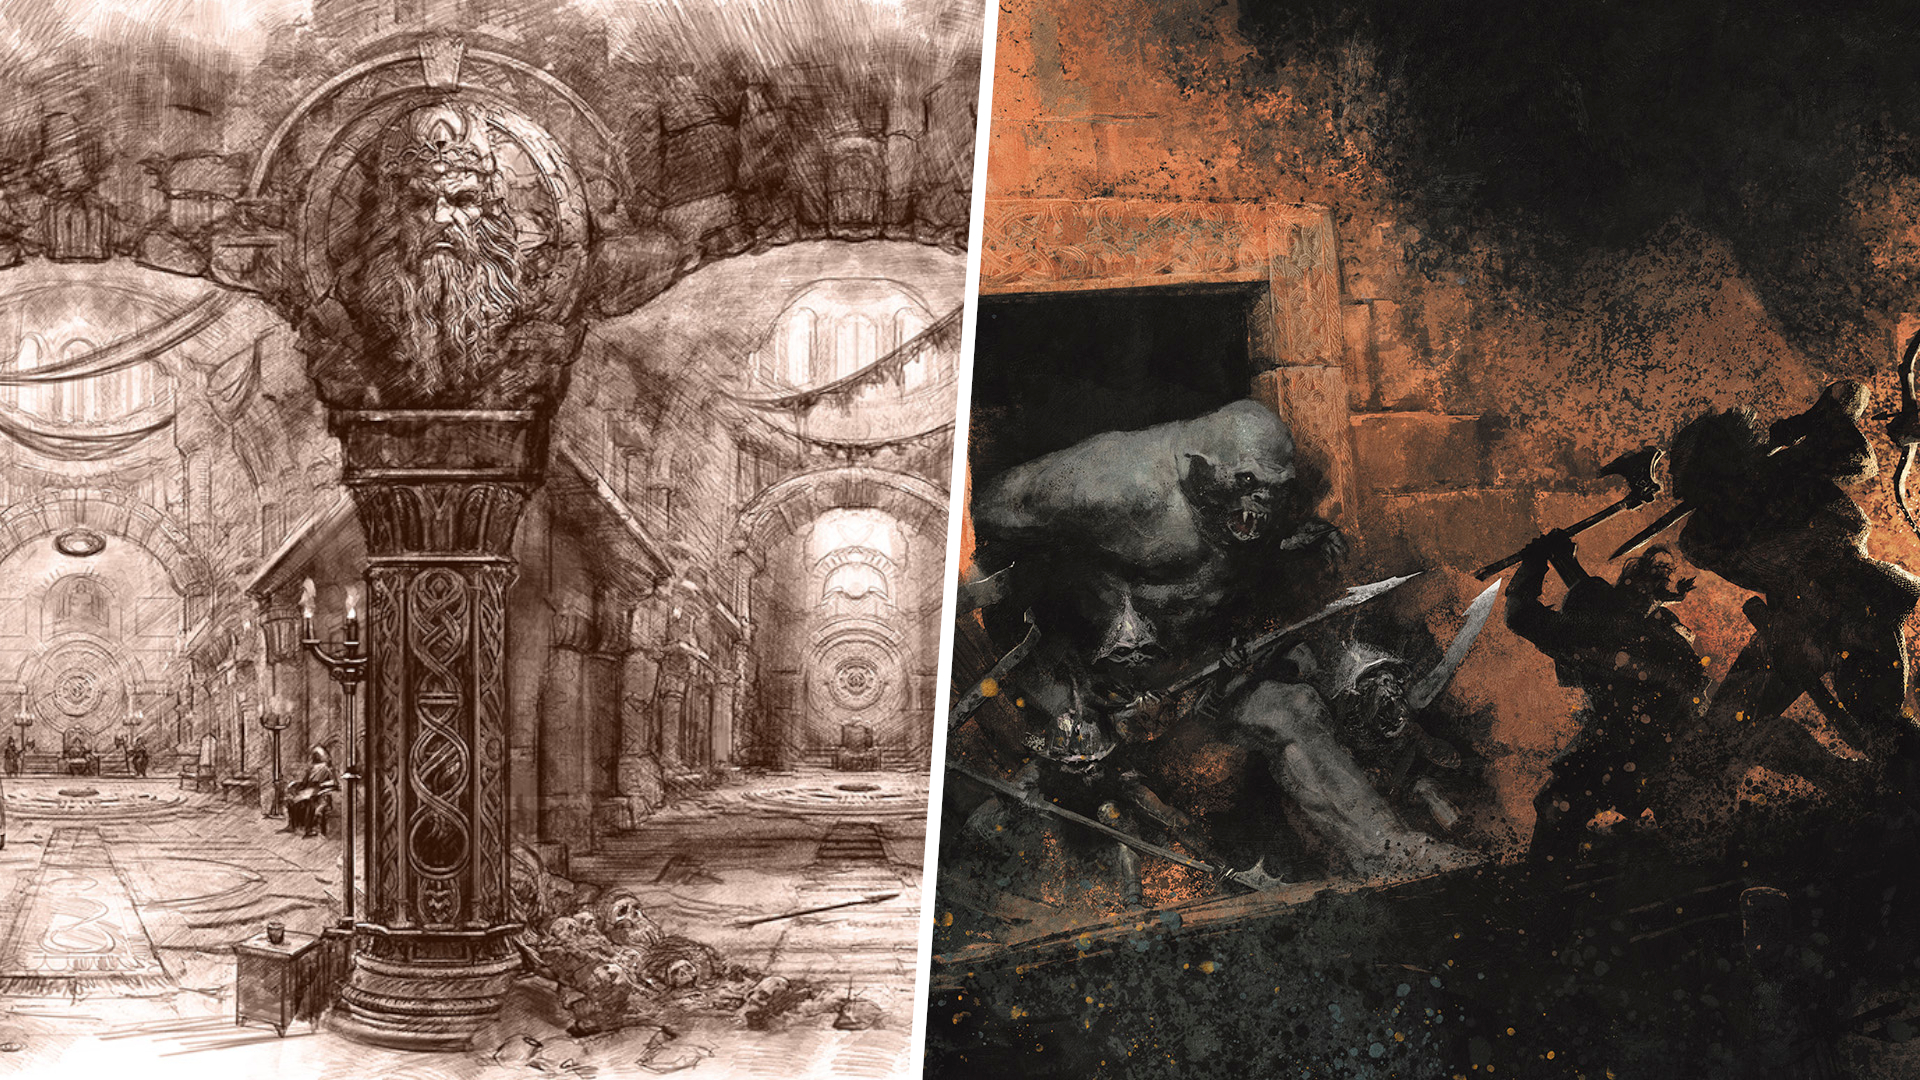 Artwork of sculpted pillars alongside a cave troll attack in Moria - Through the Doors of Durin